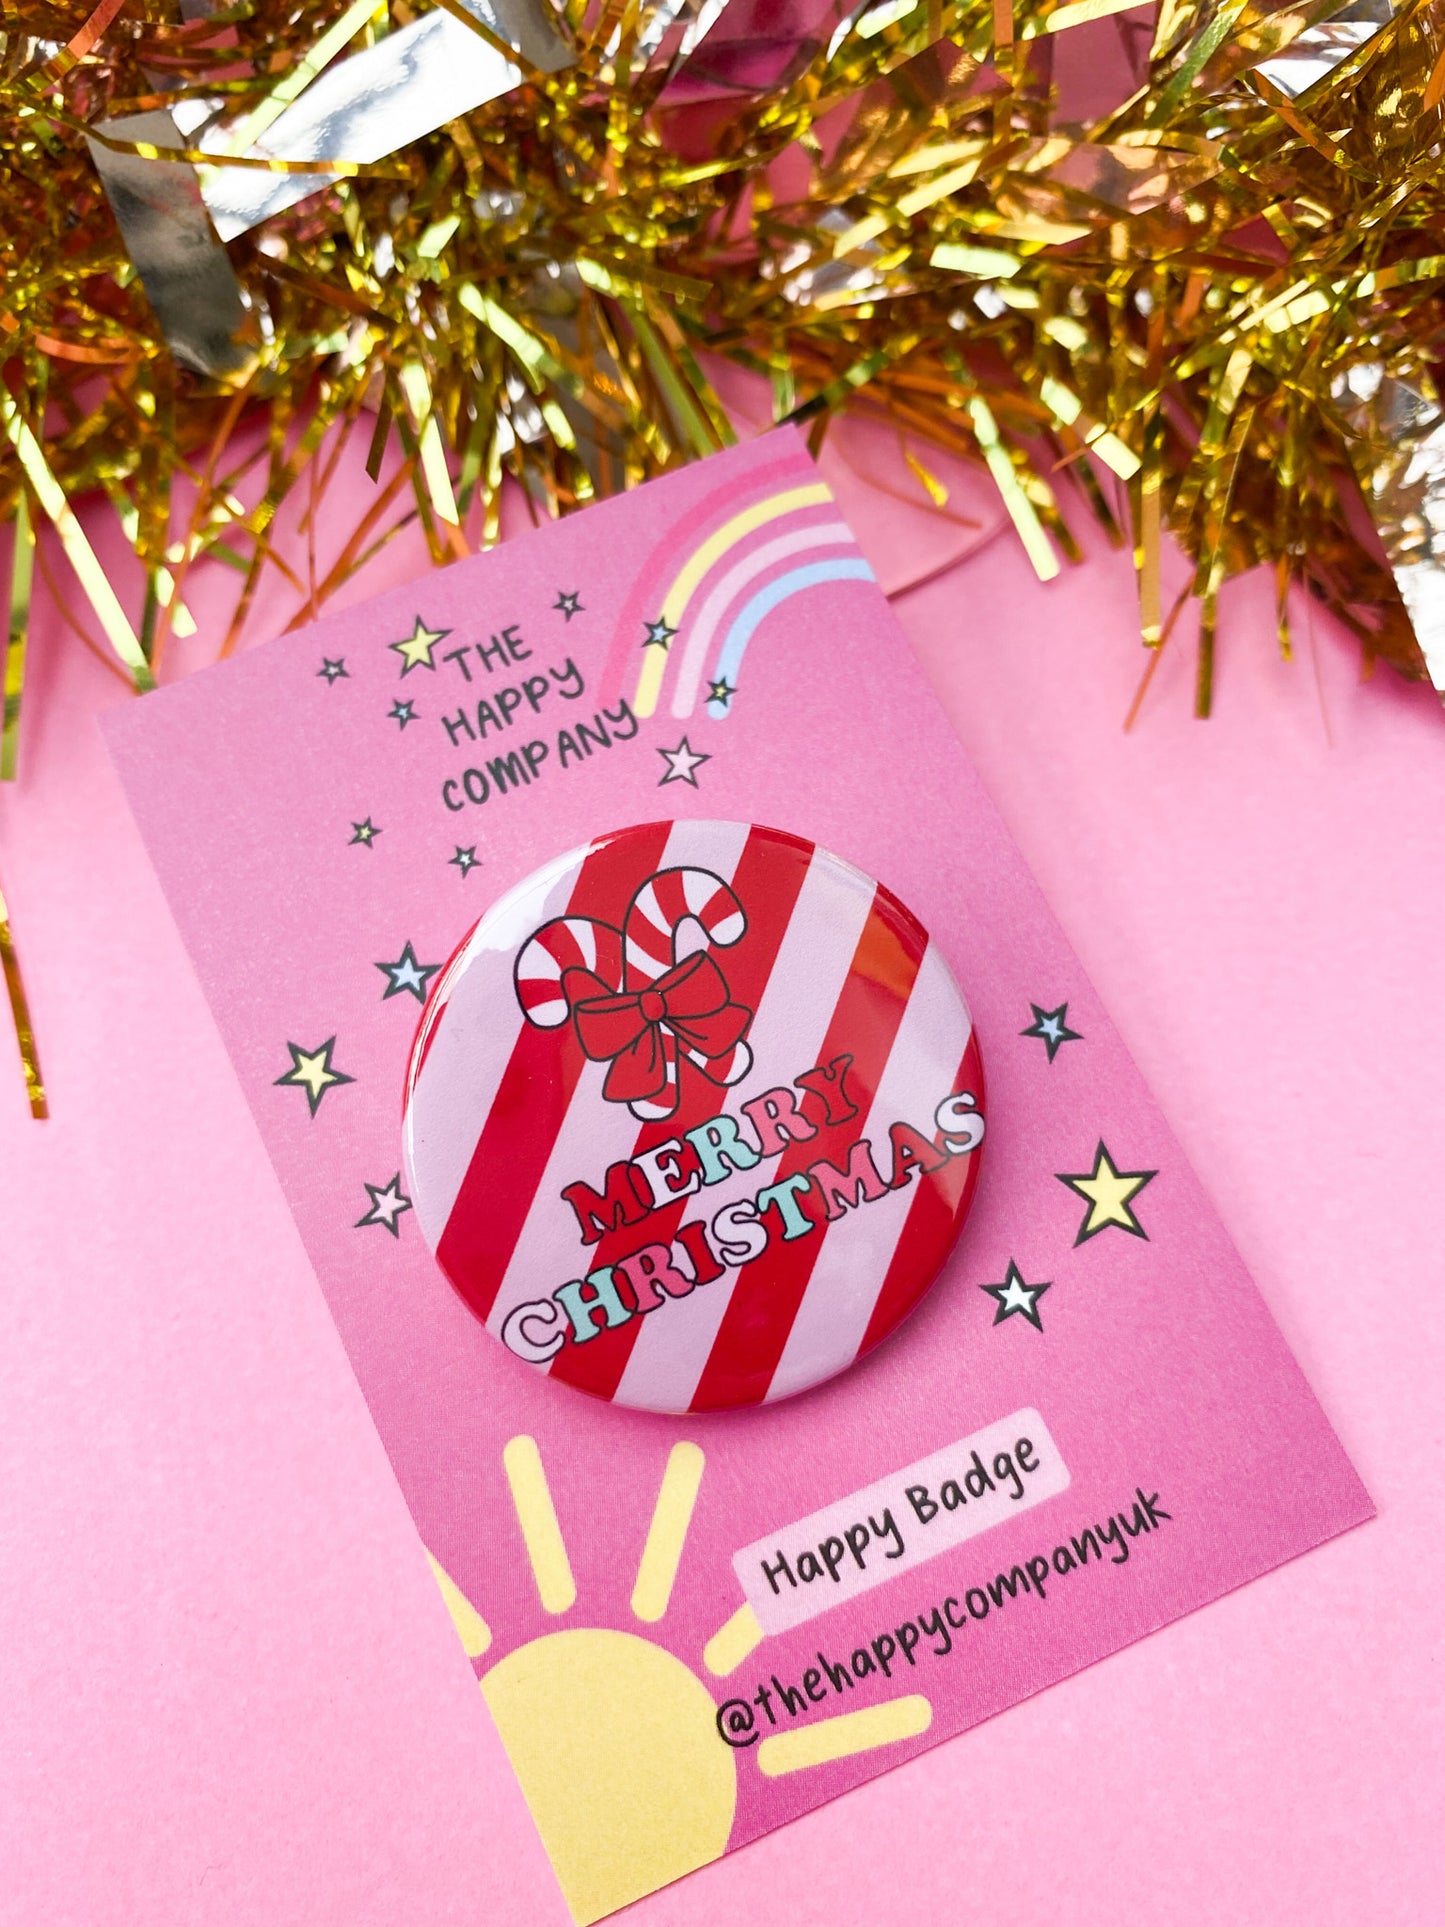 Merry Christmas Candy Cane Pin Badge